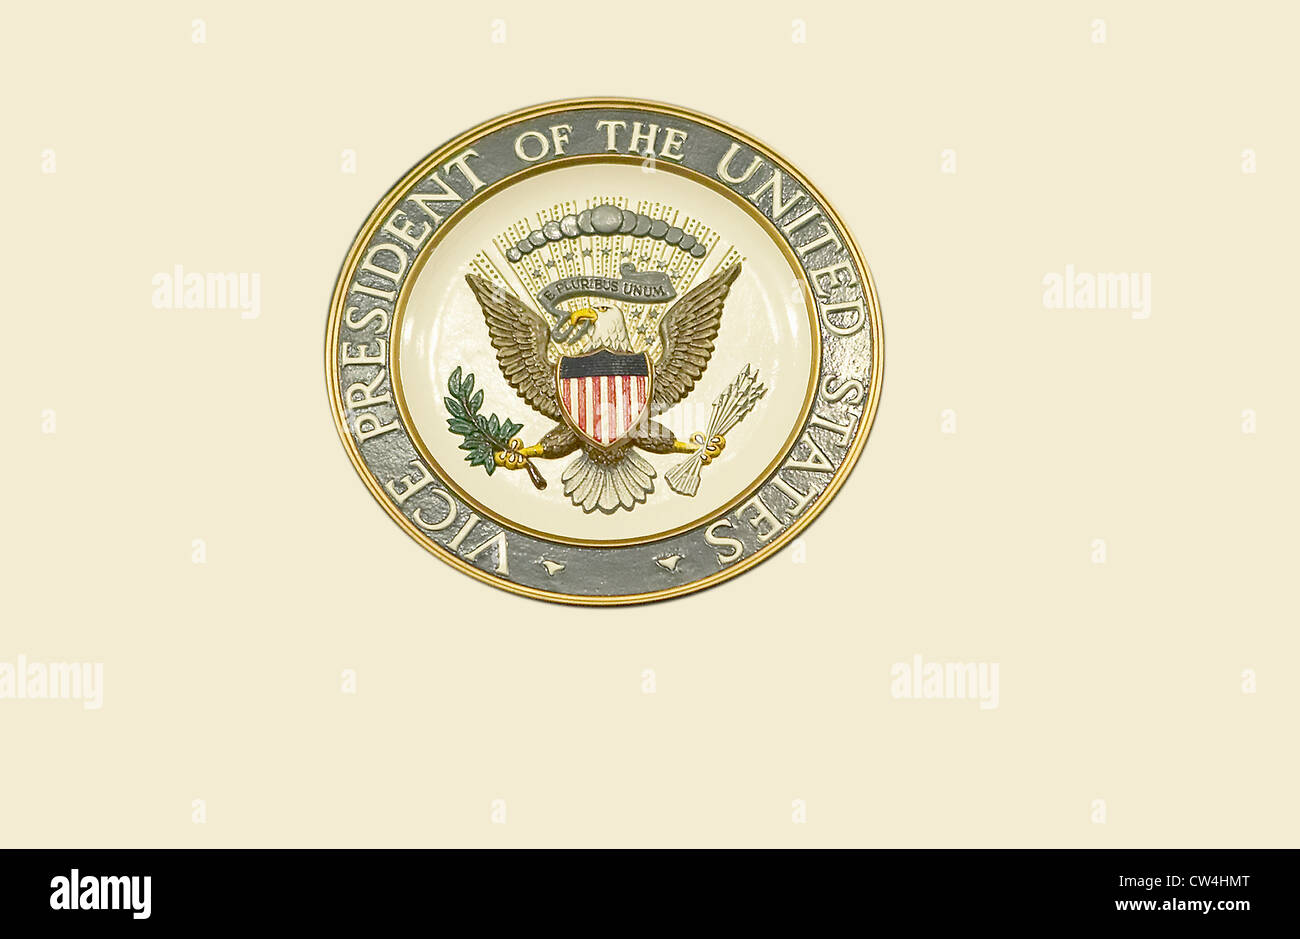 Seal of the Vice President of the United States Stock Photo